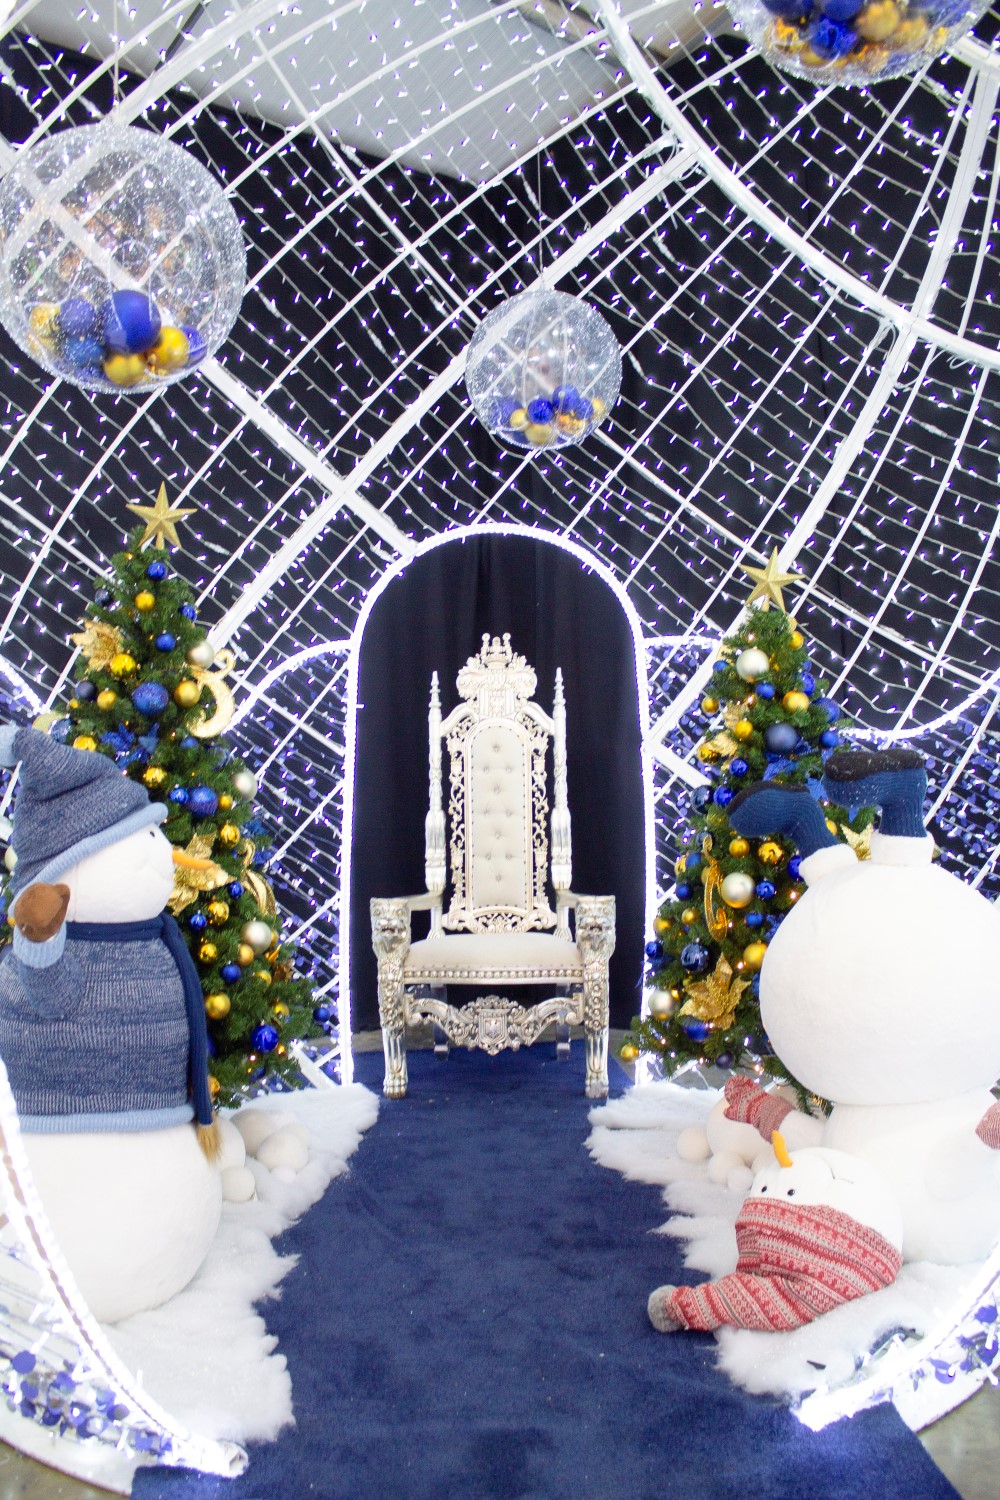 Christmas grotto scene with white throne, two blue and gold themed artificial Christmas trees, and two snowmen in a large white bauble motif with large baubles hanging down.